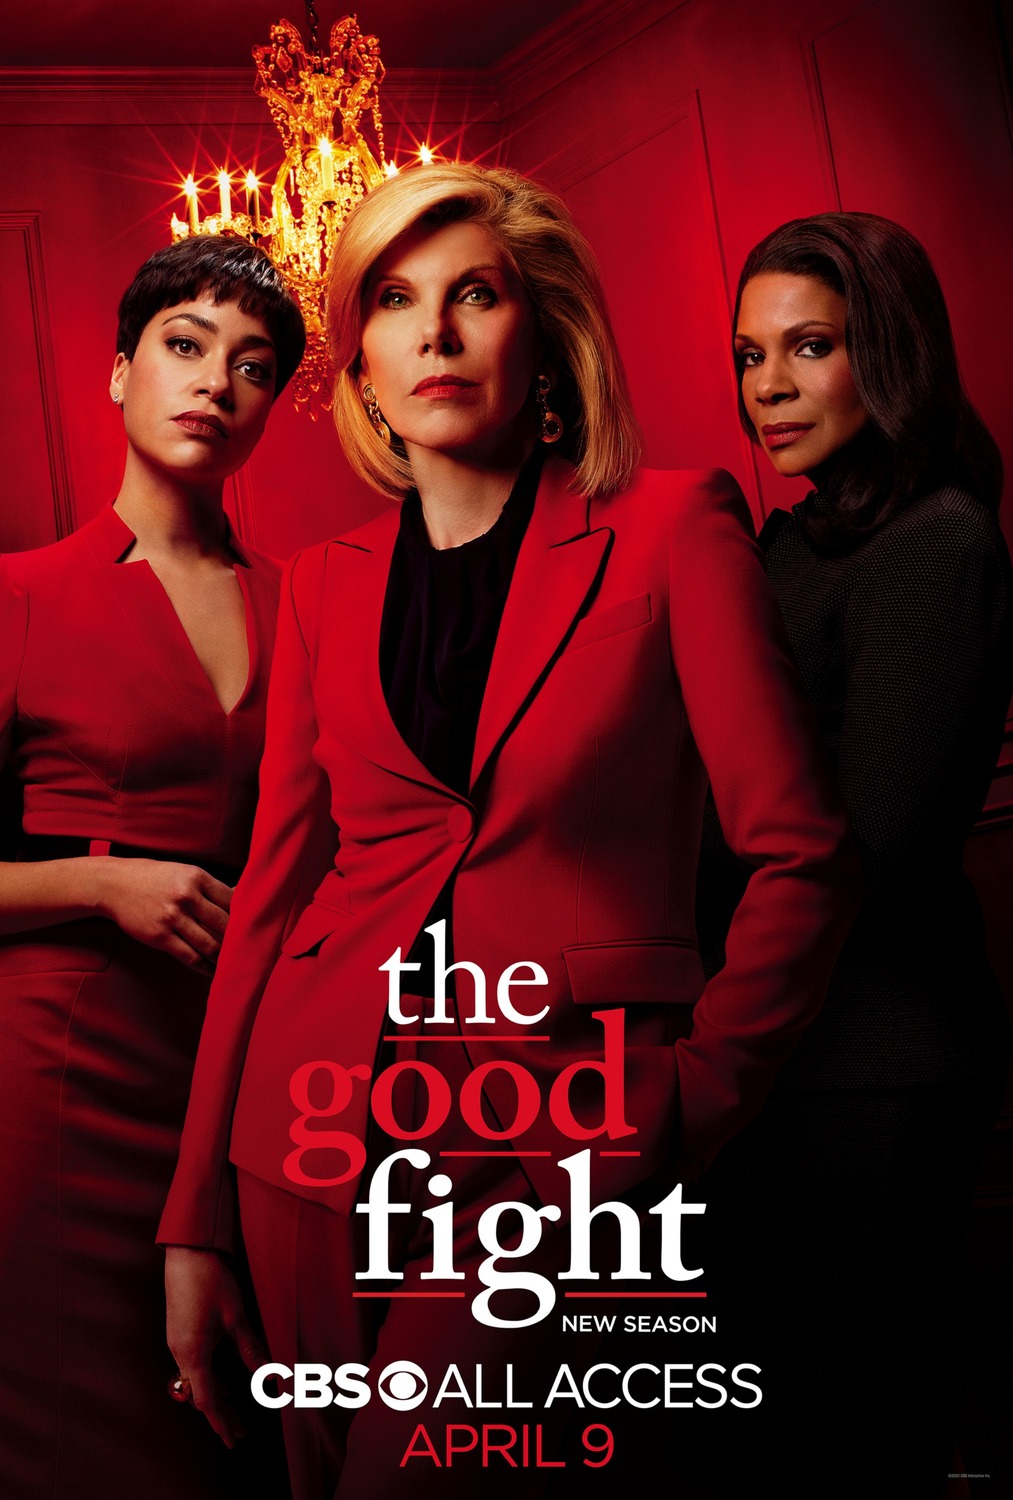 27 - The Good Fight